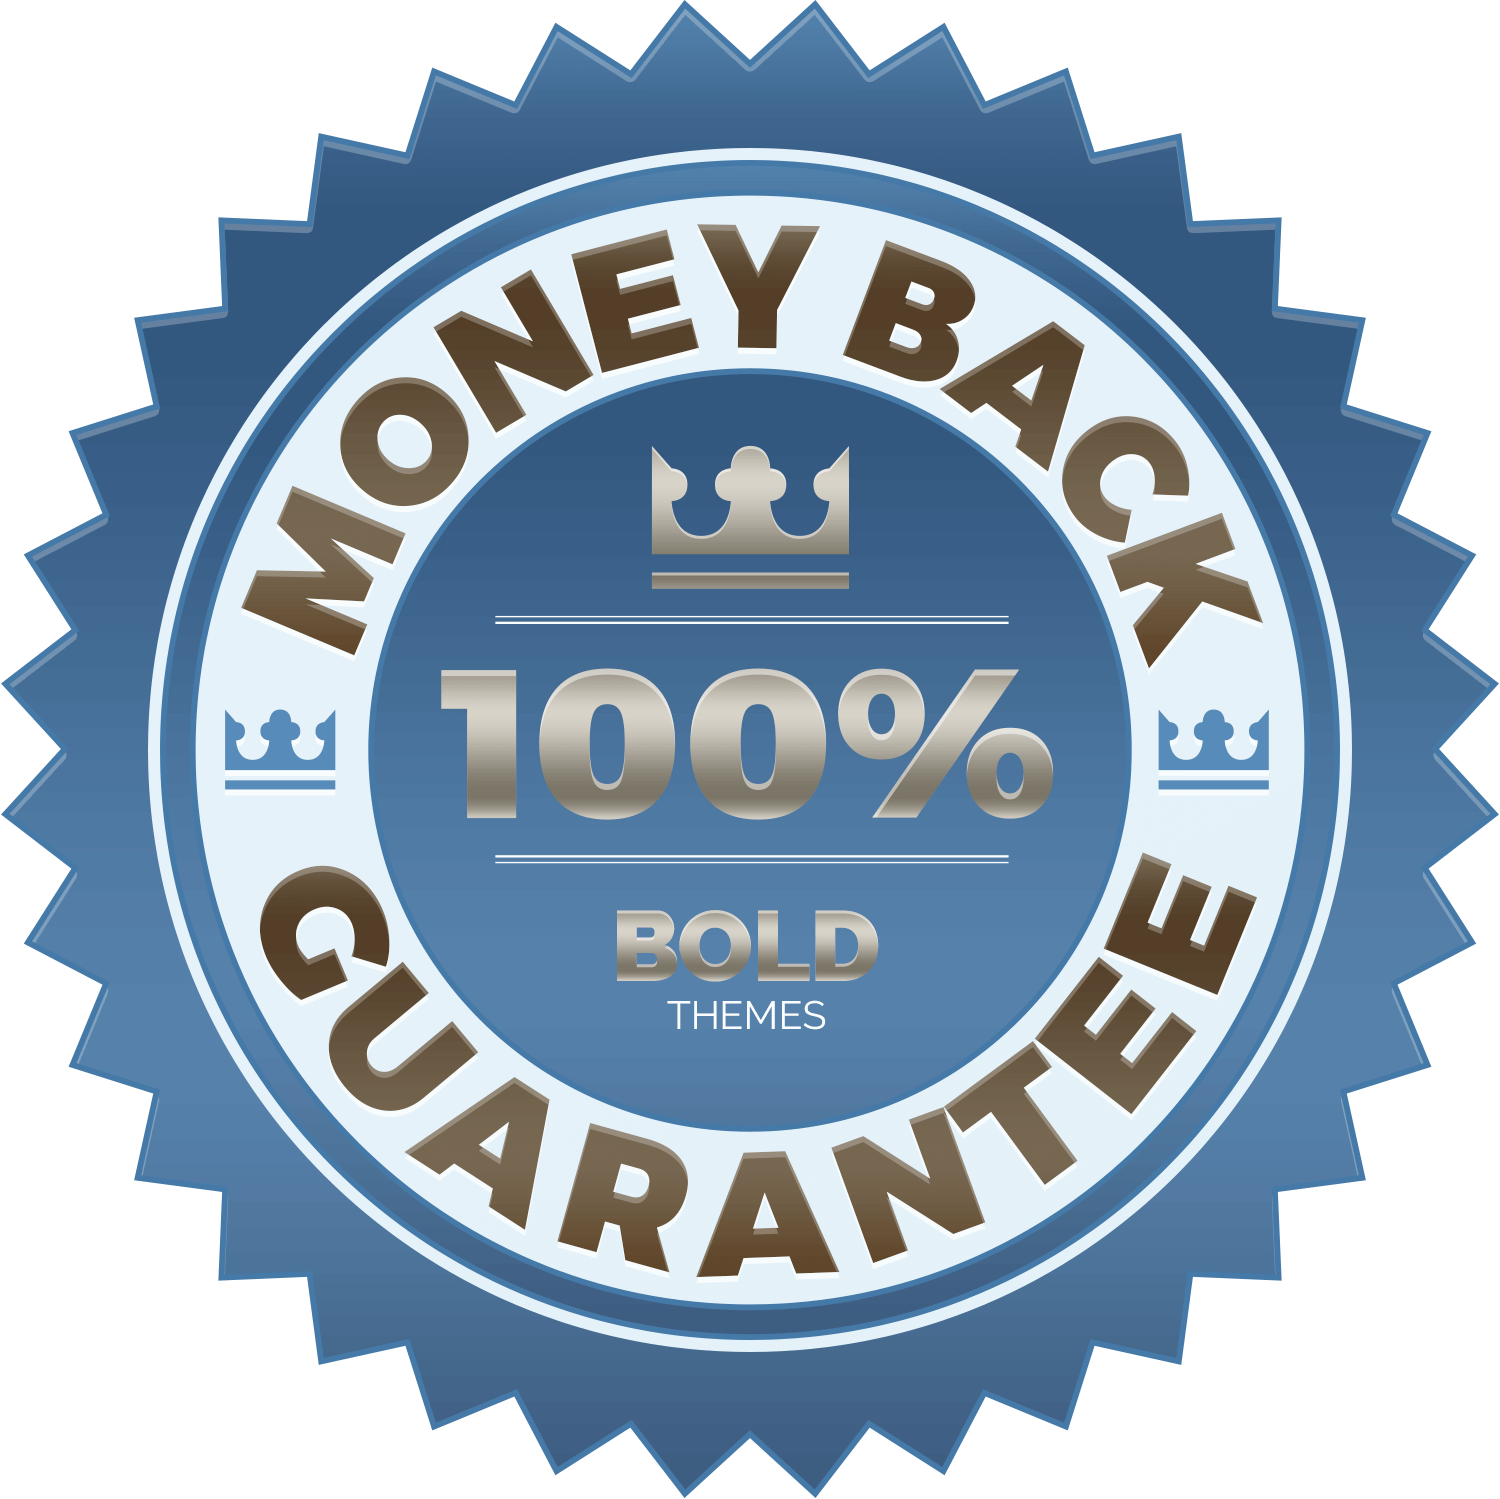 https://benchmarkplus.in/wp-content/uploads/2017/05/Money-back-guarantee.png